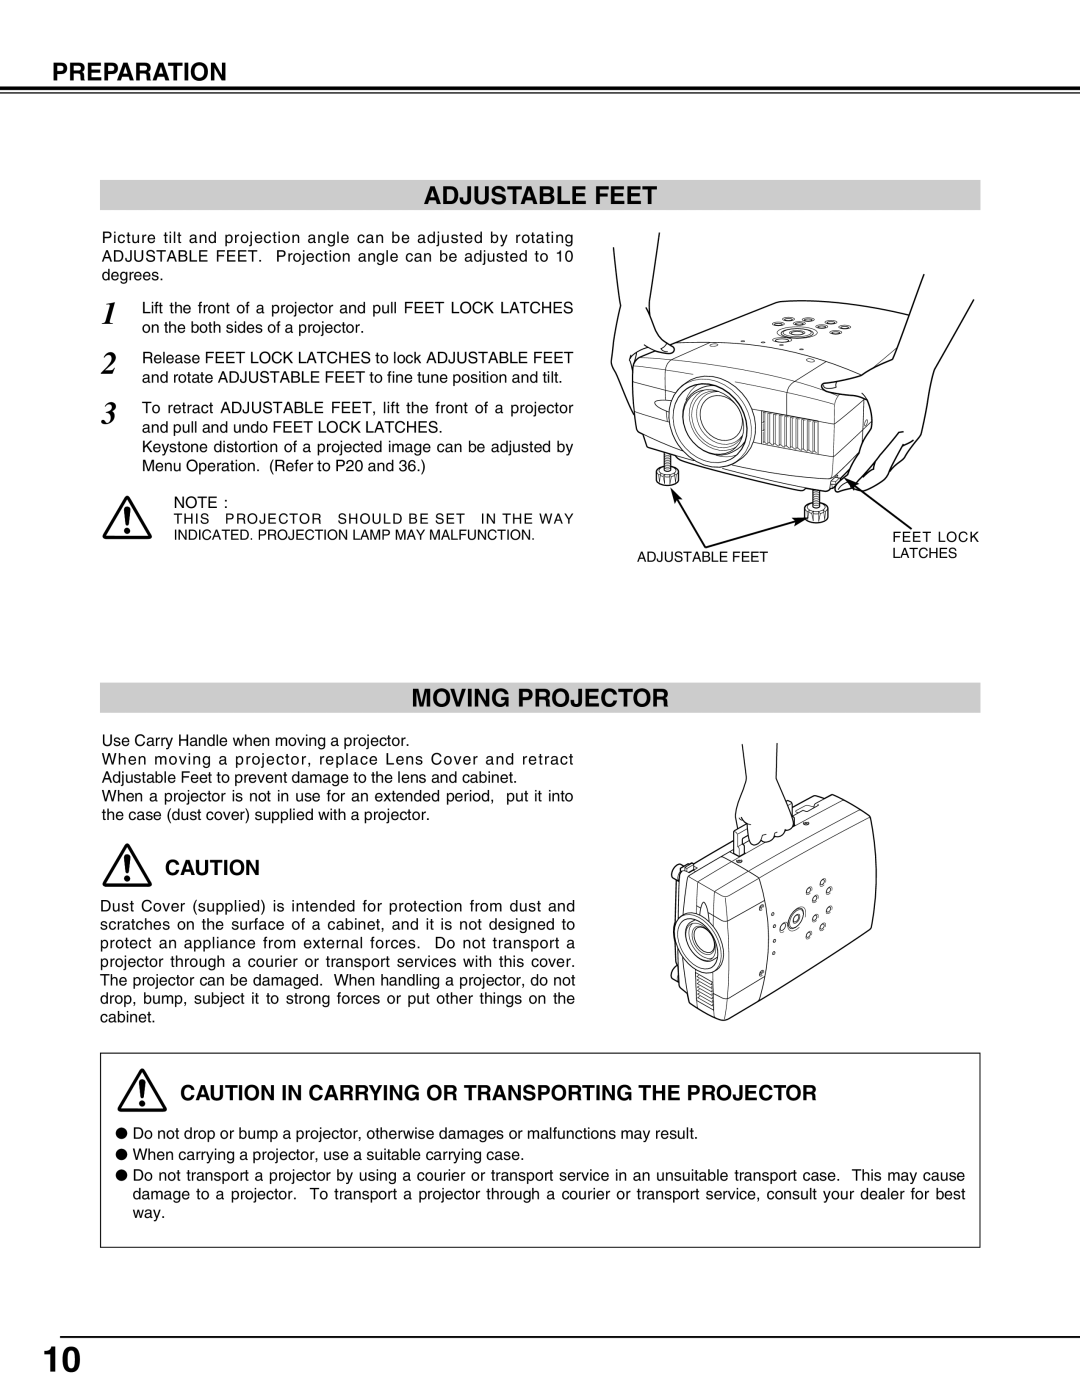 Sanyo PLC-XT11, PLC-XT16 Preparation Adjustable Feet, Moving Projector, Caution In Carrying Or Transporting The Projector 